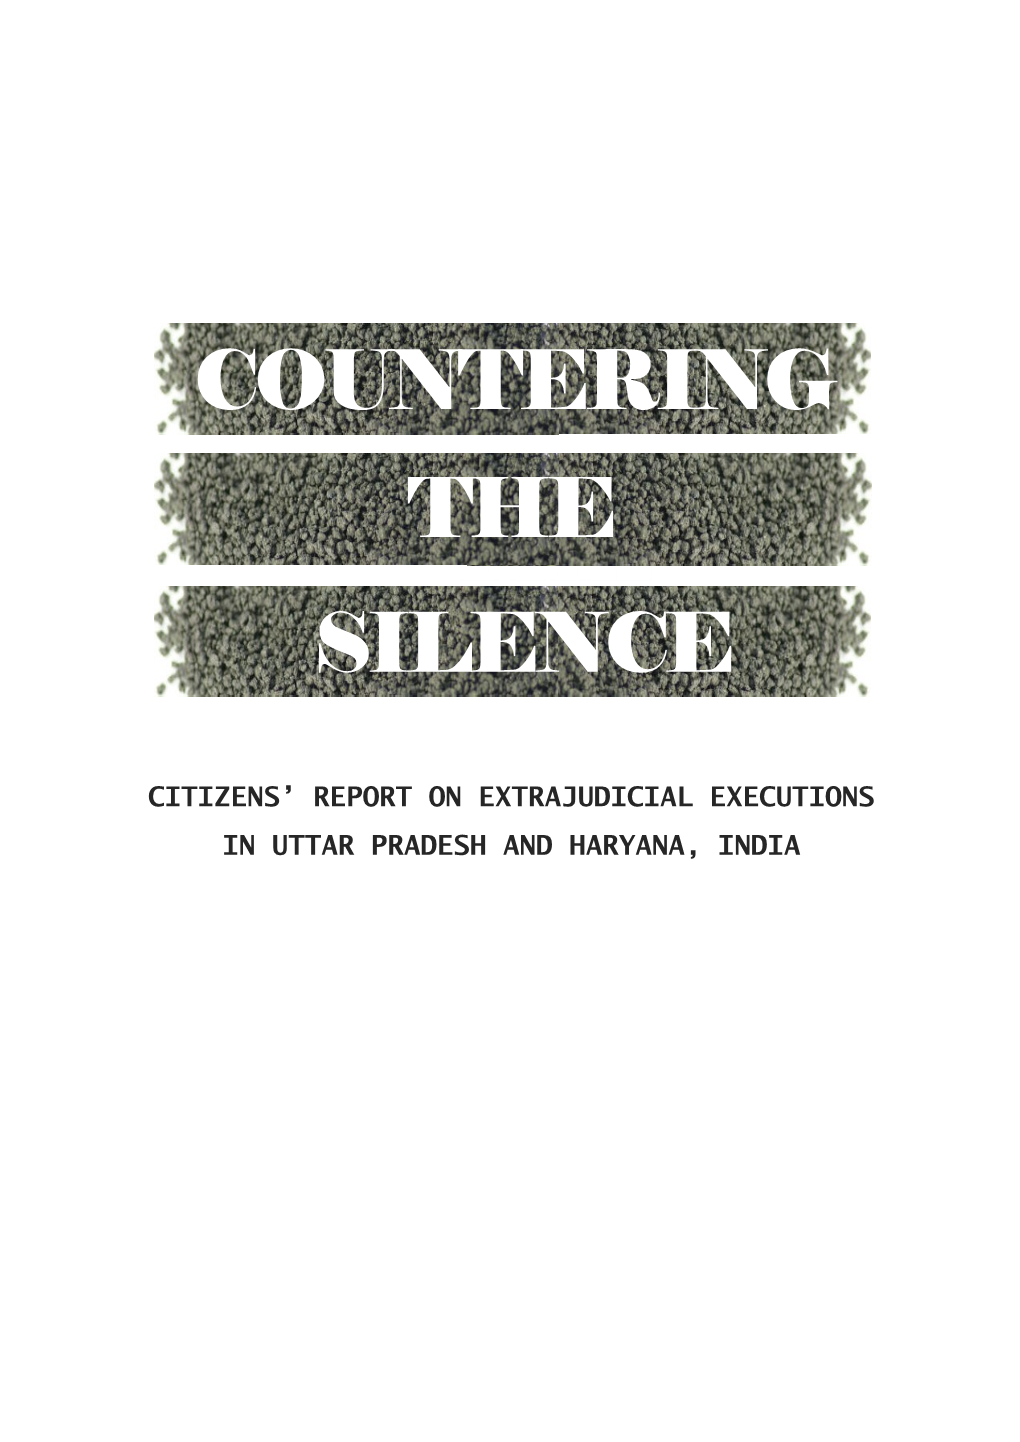 Countering the Countering the Silence